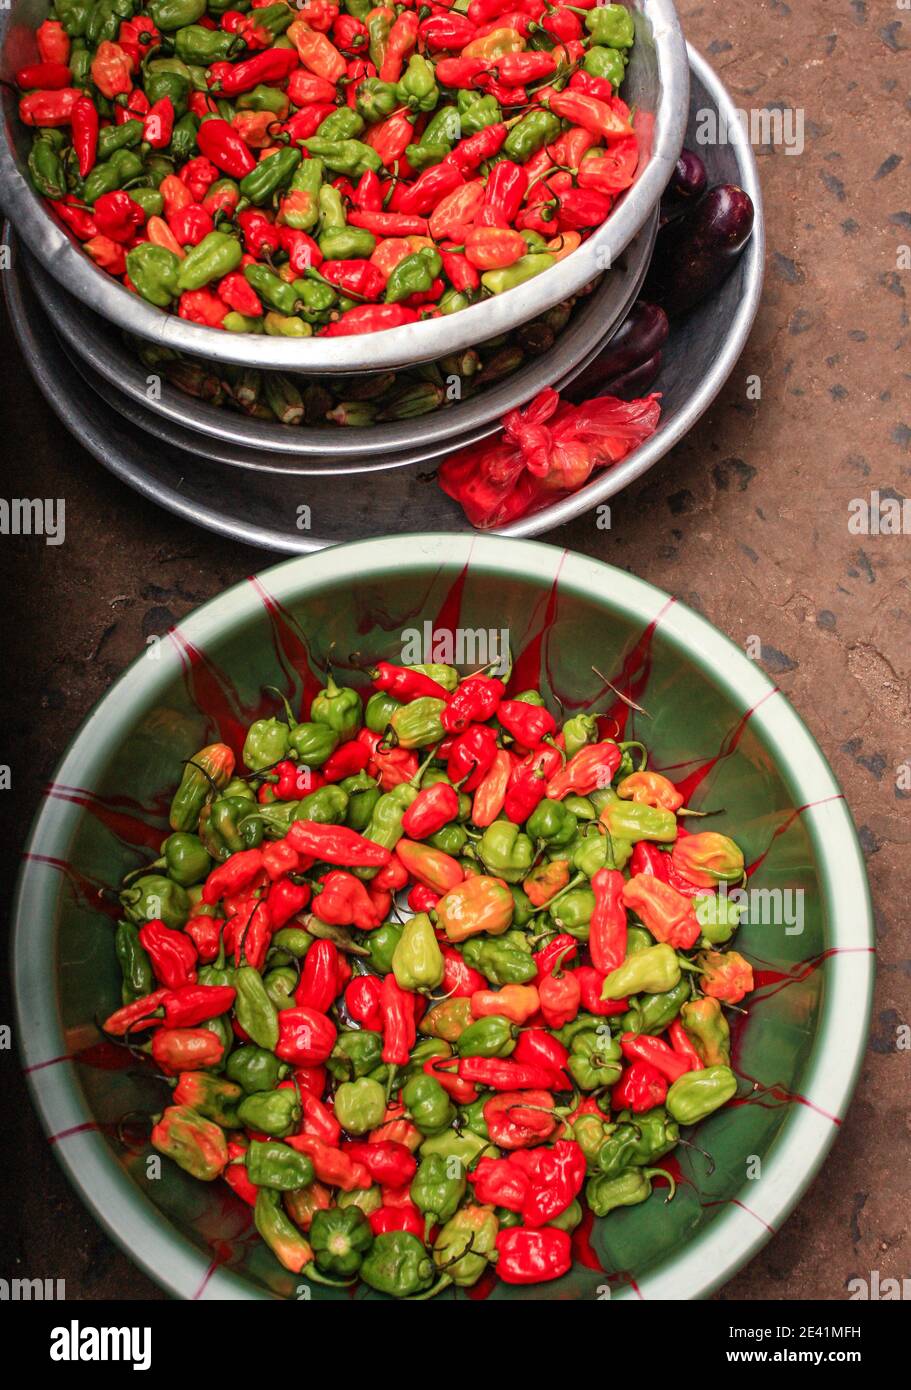 red green and yellow Hot pepper sold at a market in freetown sierra leone Stock Photo